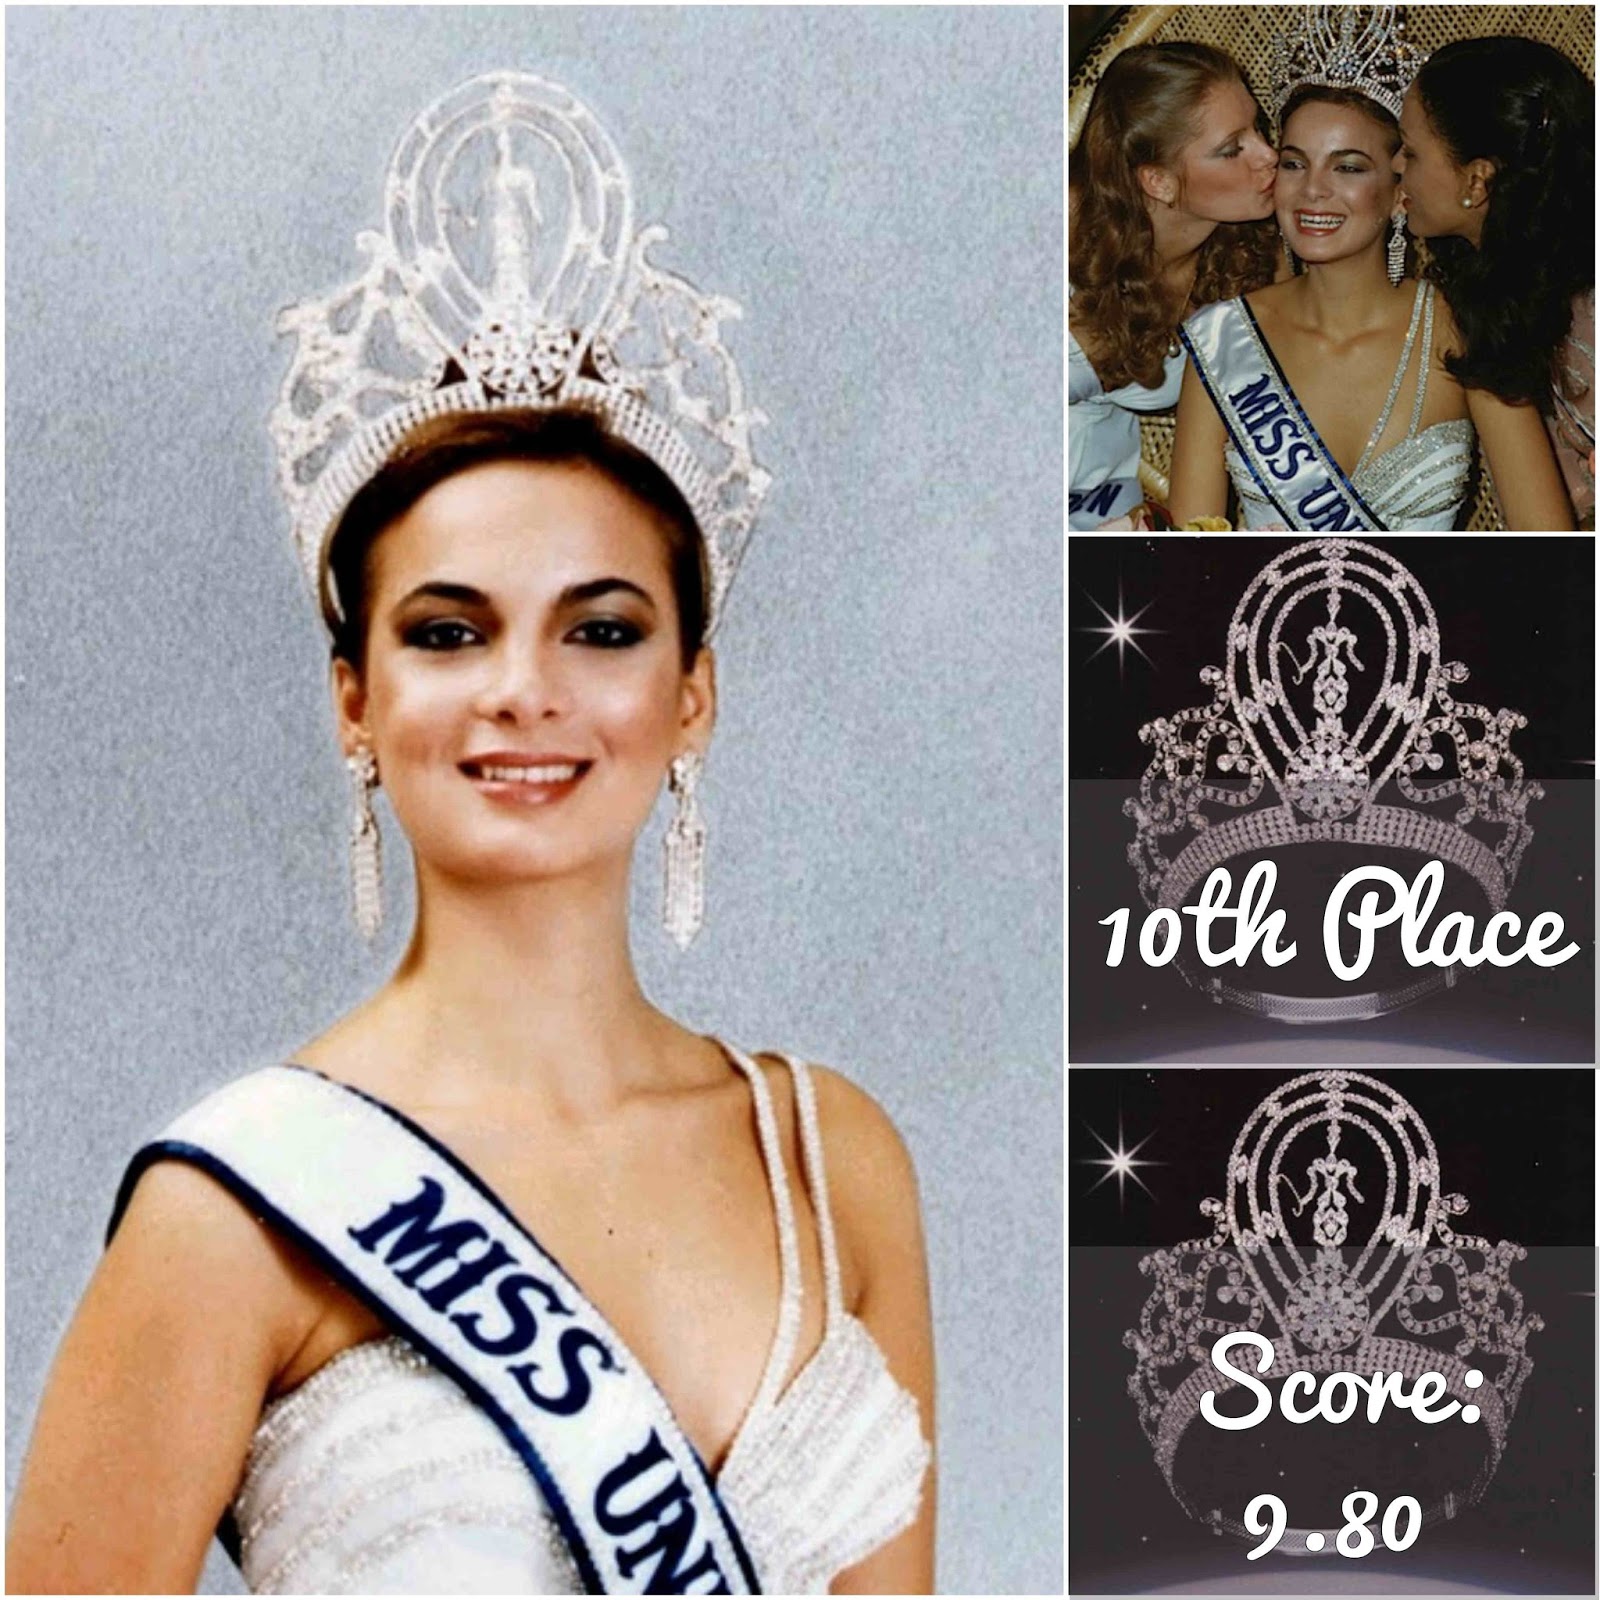 Most Beautiful Miss Universe 1952 2016 10th Place To 9th Place